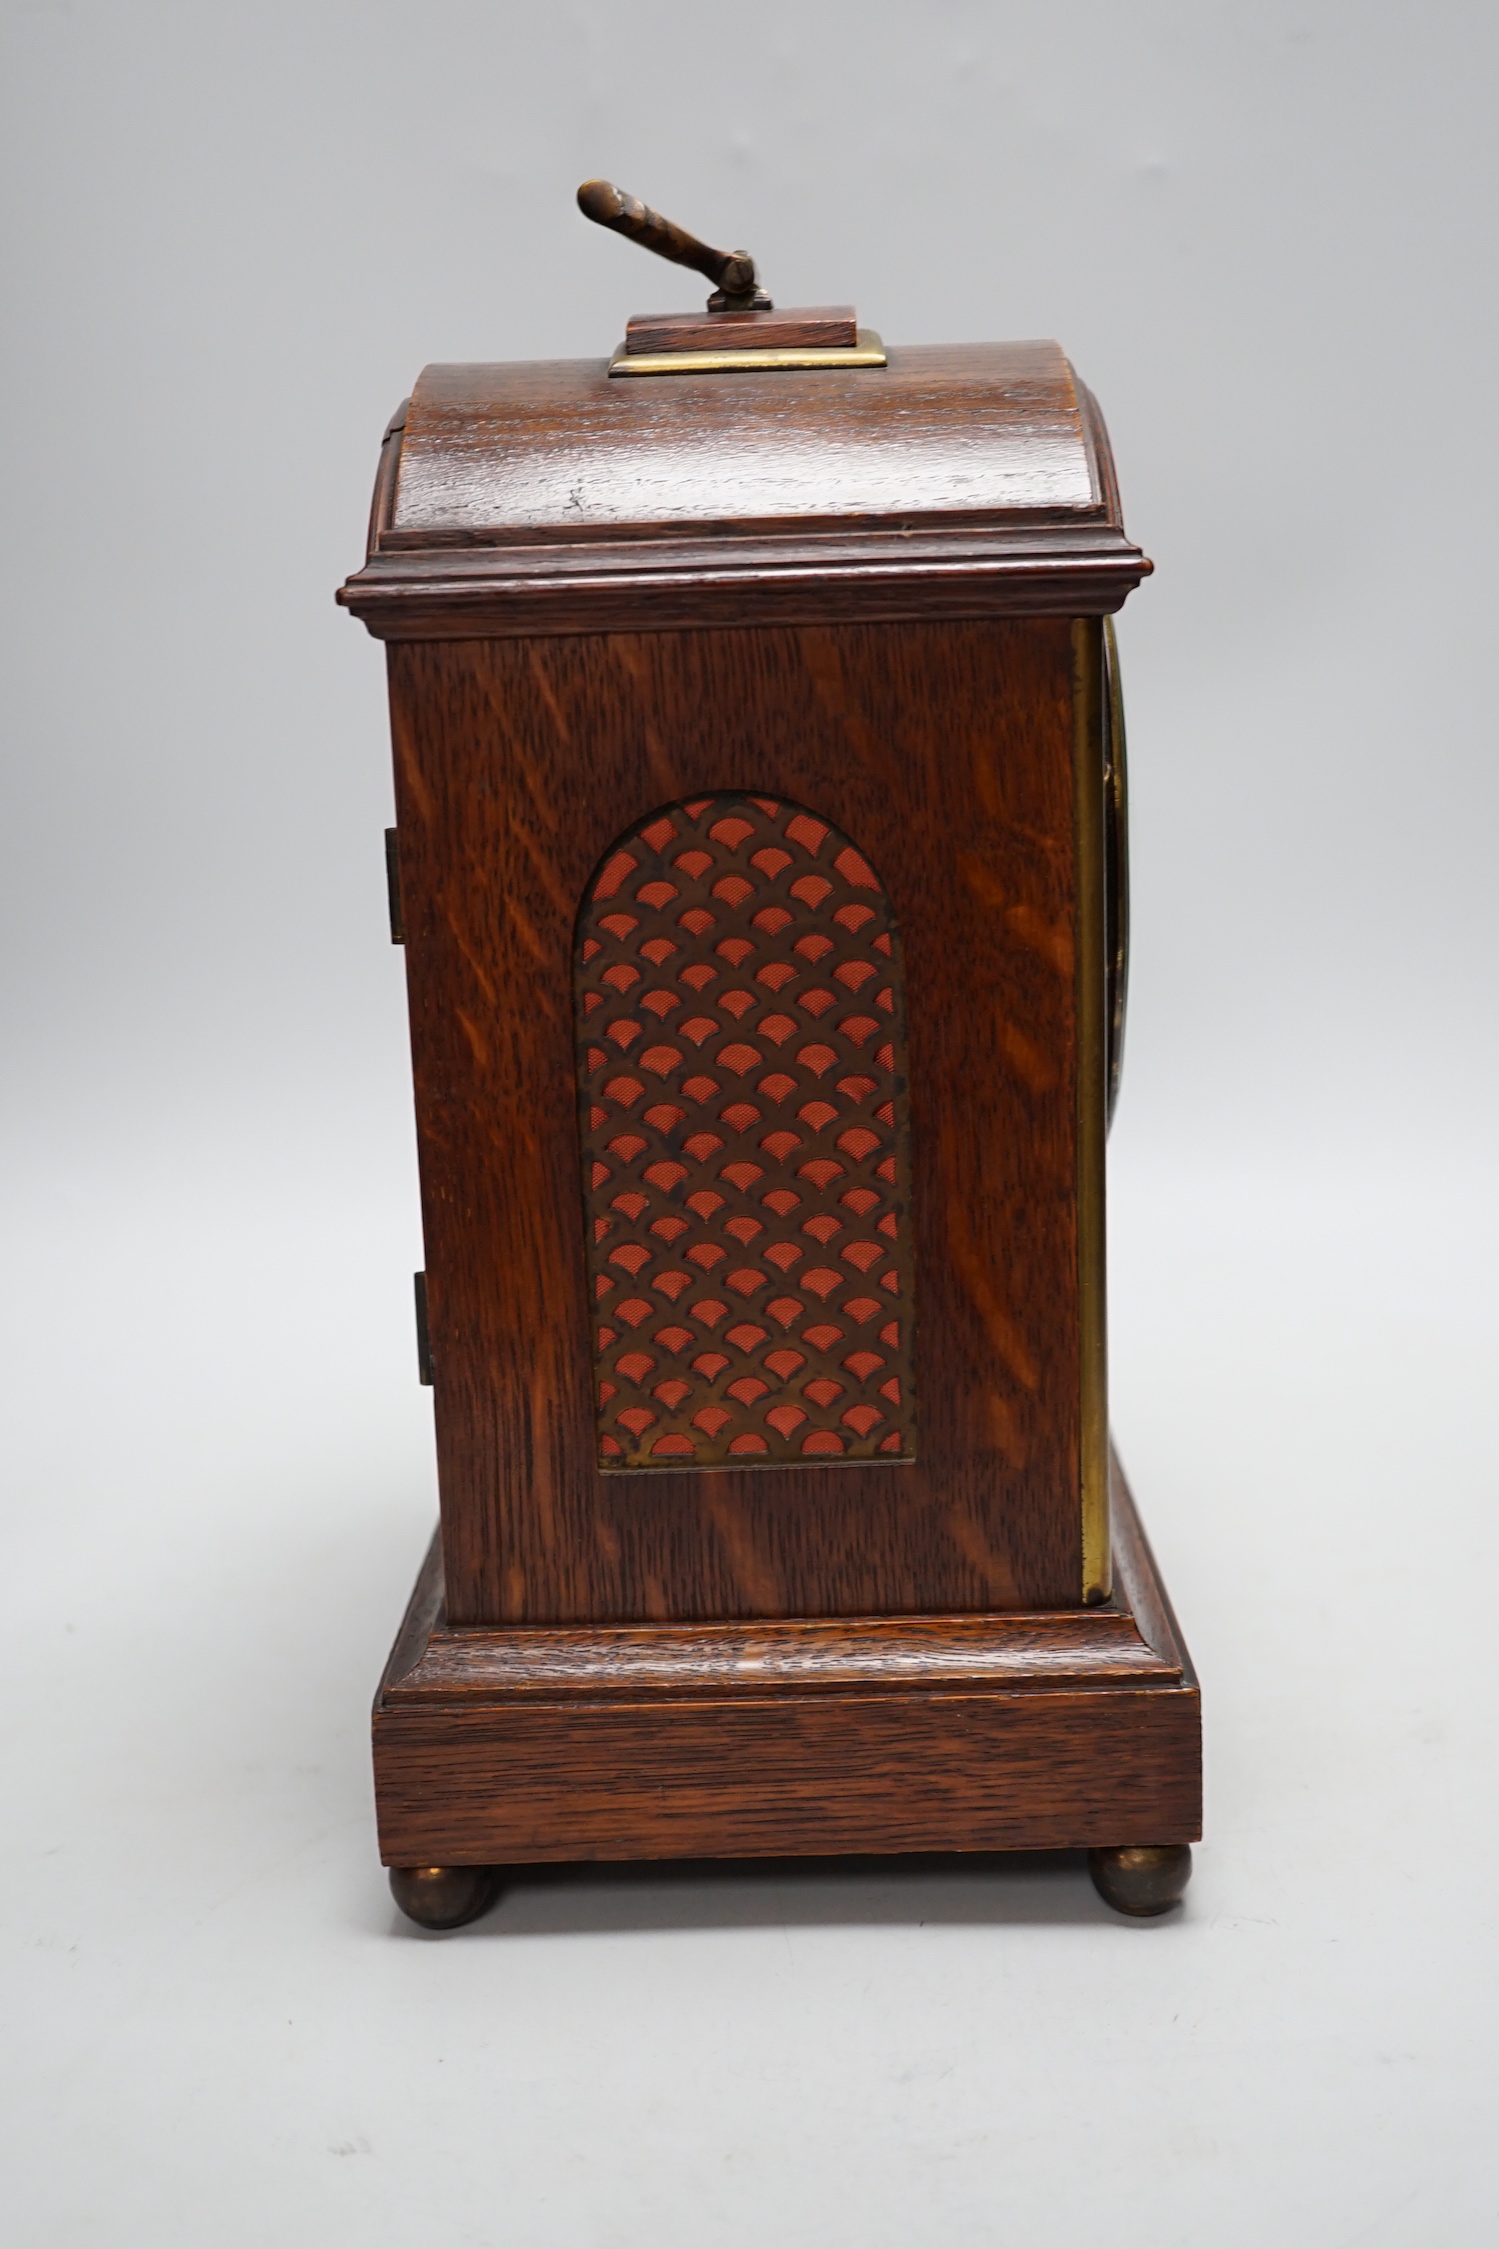 A oak mantel clock in a Regency style with pad top, striking on a coiled gong, 30cm high - Image 2 of 4